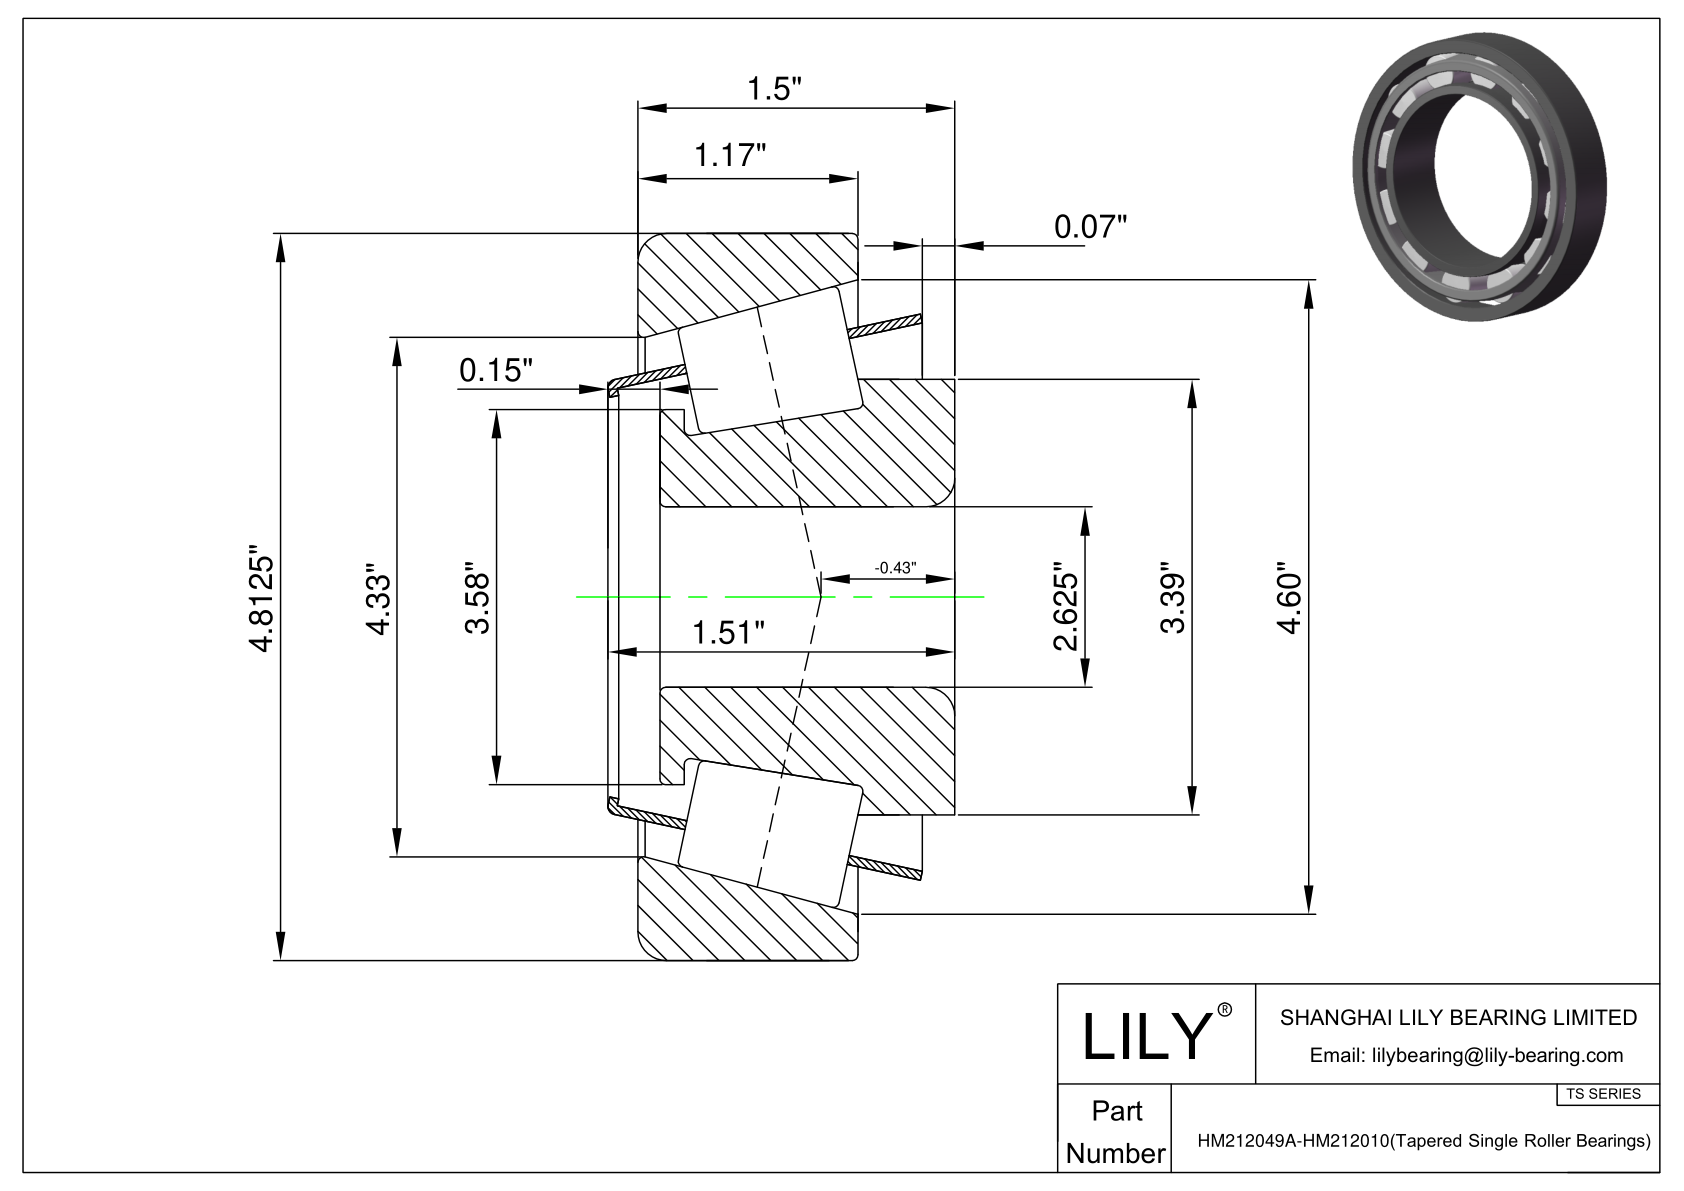 HM212049A-HM212010 TS (Tapered Single Roller Bearings) (Imperial) cad drawing